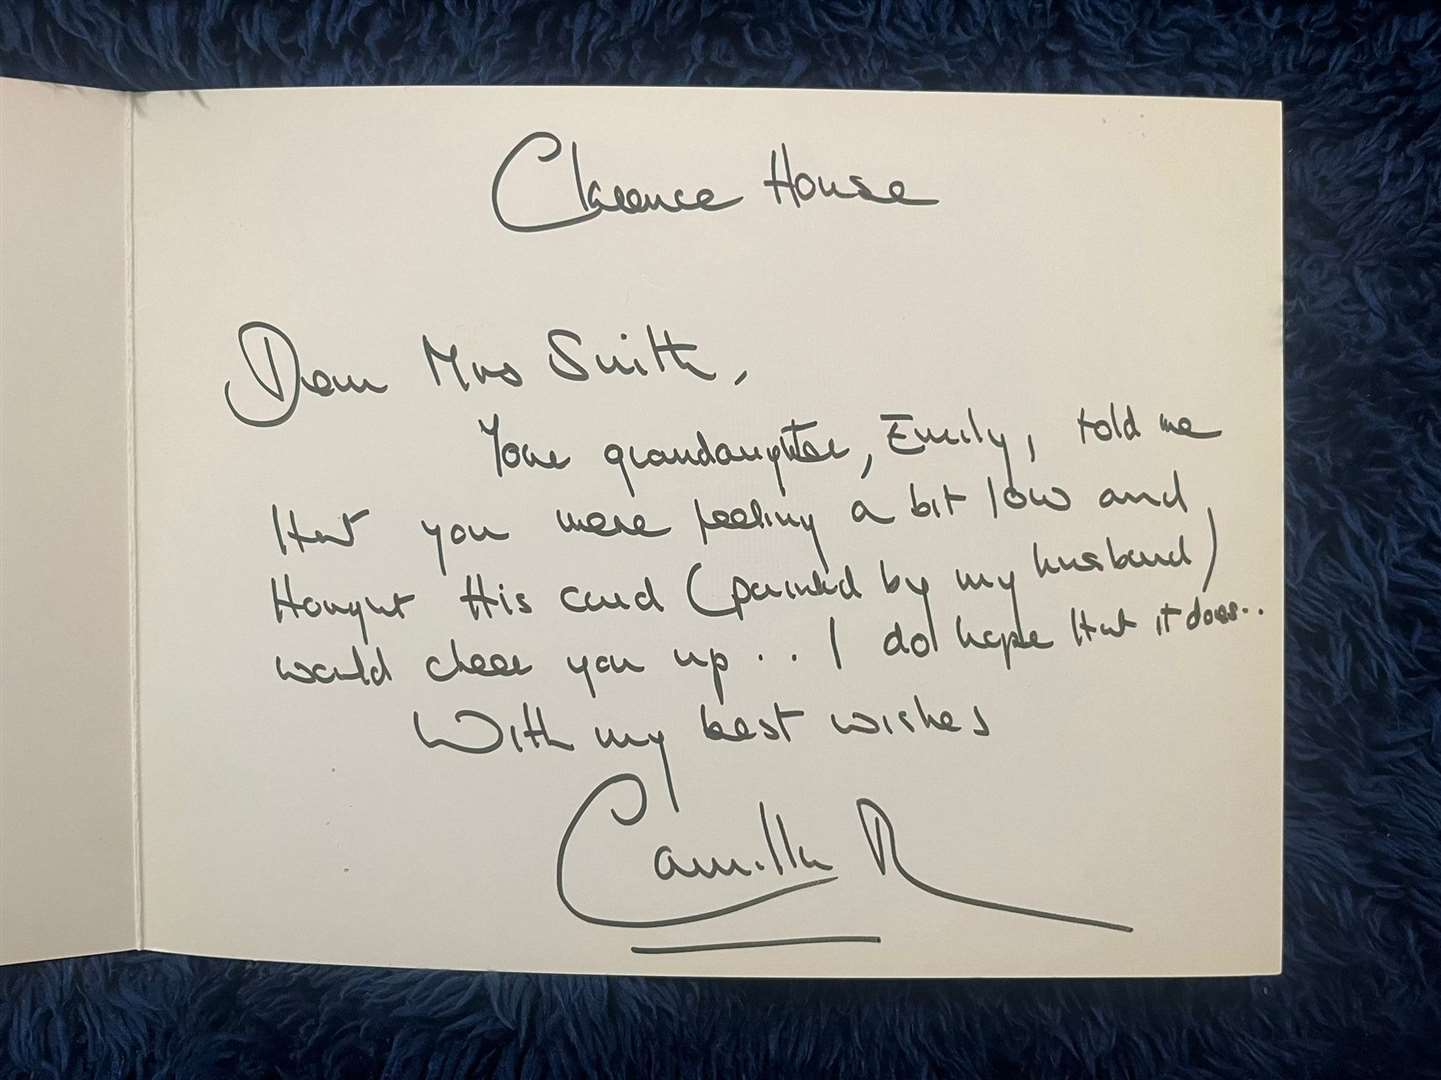 Lois received a letter from Camilla